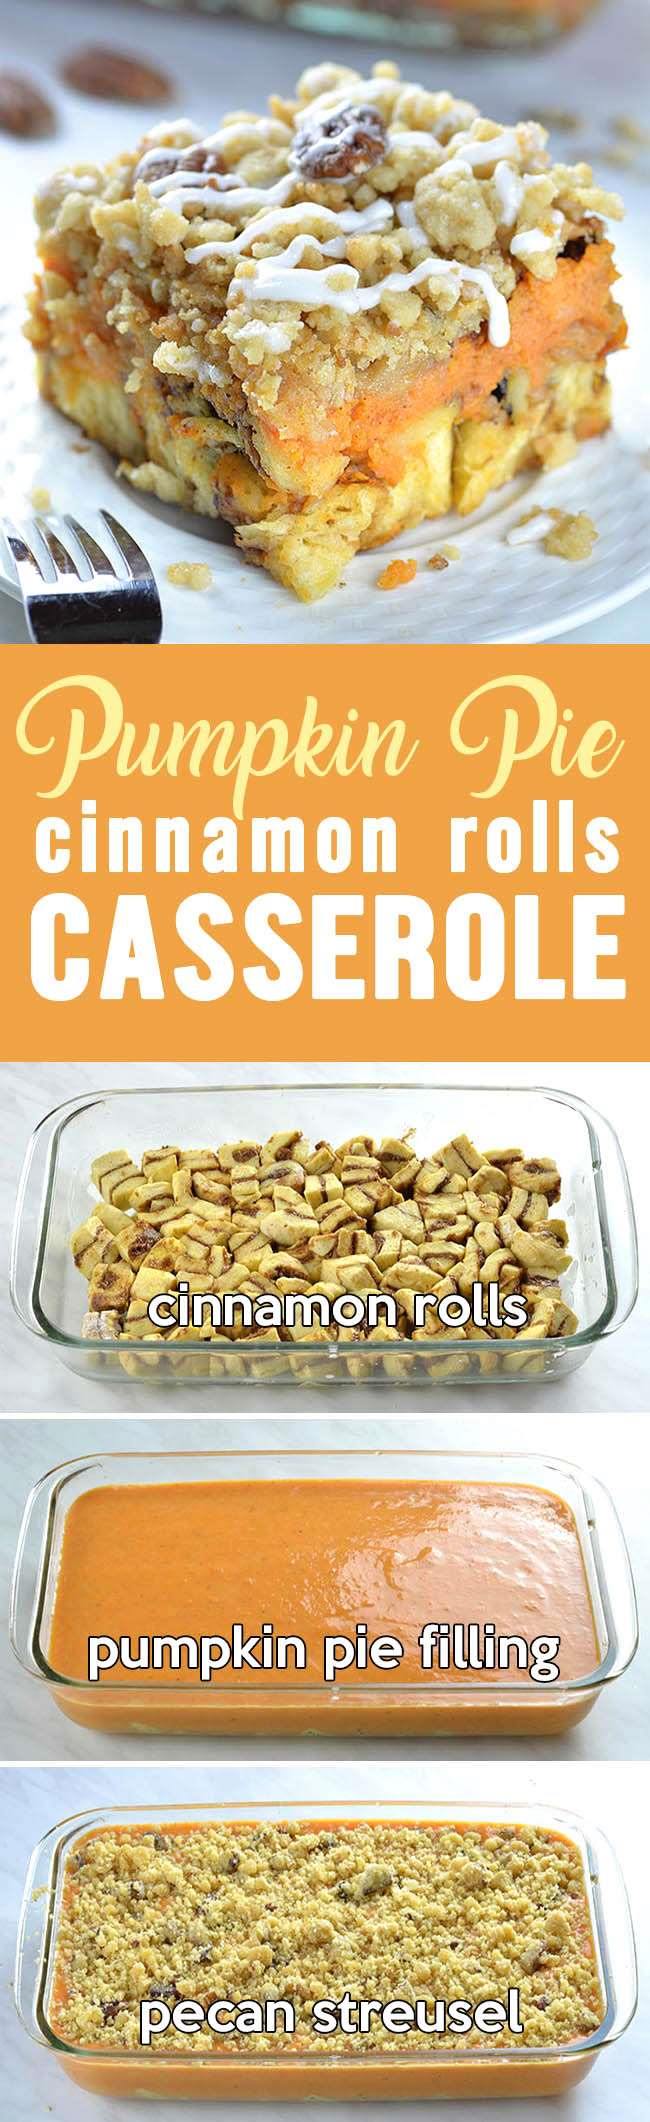 Pumpkin Pie Cinnamon Roll Casserole would be great as special, festive breakfast or brunch for Thanksgiving or Christmas, too.